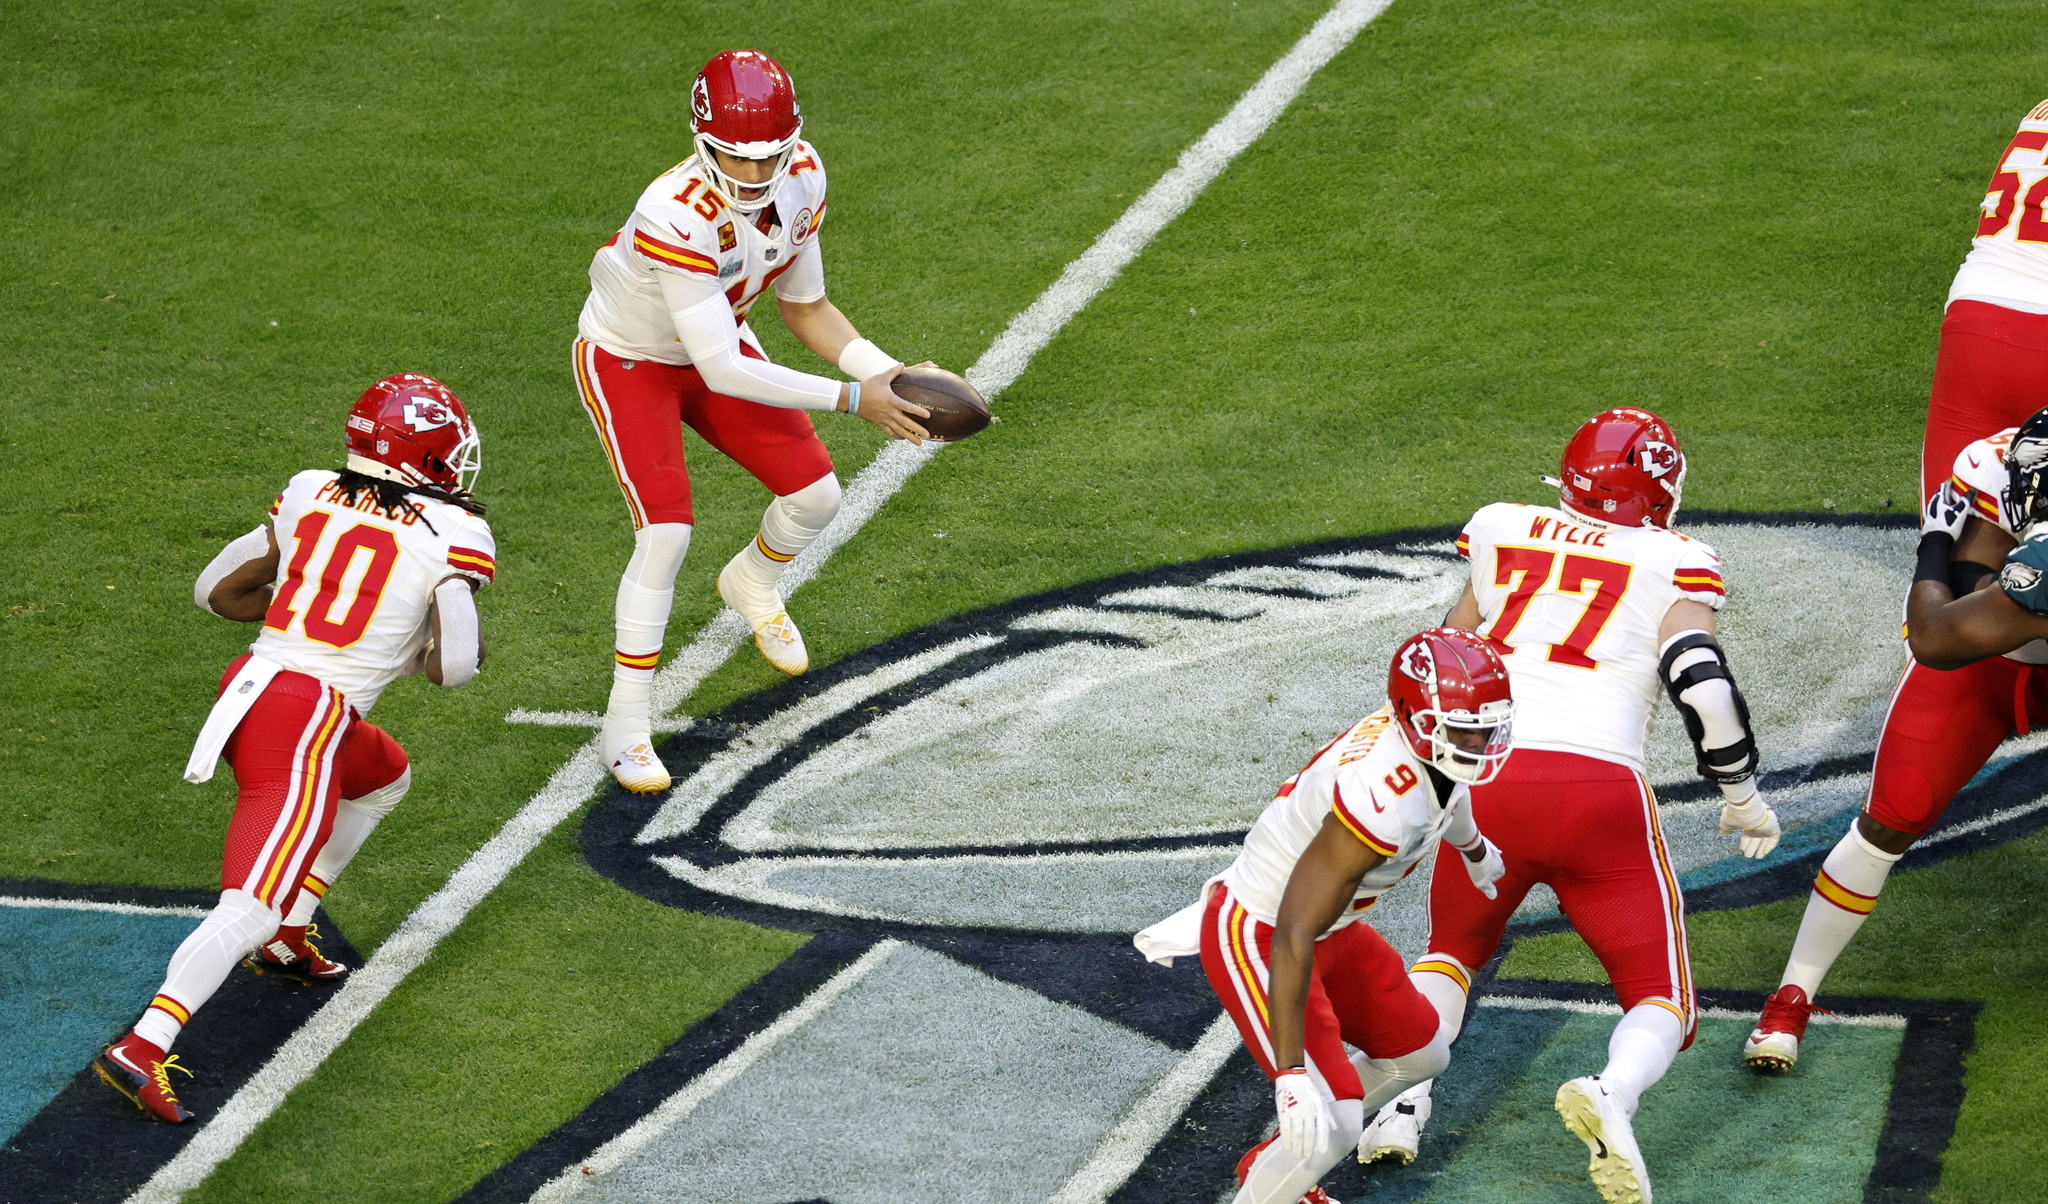 Glendale (United States), 12/02/2023.- Kansas City Chiefs quarterback Patrick  lt;HIT gt;Mahomes lt;/HIT gt; (2L) hands off to running back Isiah Pacheco (L) against the Philladelphia Eagles in the first quarter of Super Bowl LVII between the AFC champion Kansas City Chiefs and the NFC champion Philadelphia Eagles at State Farm Stadium in Glendale, Arizona, 12 February 2023. The annual Super Bowl is the Championship game of the NFL between the AFC Champion and the NFC Champion and has been held every year since January of 1967. (Estados Unidos, Filadelfia) EFE/EPA/JOHN G. MABANGLO